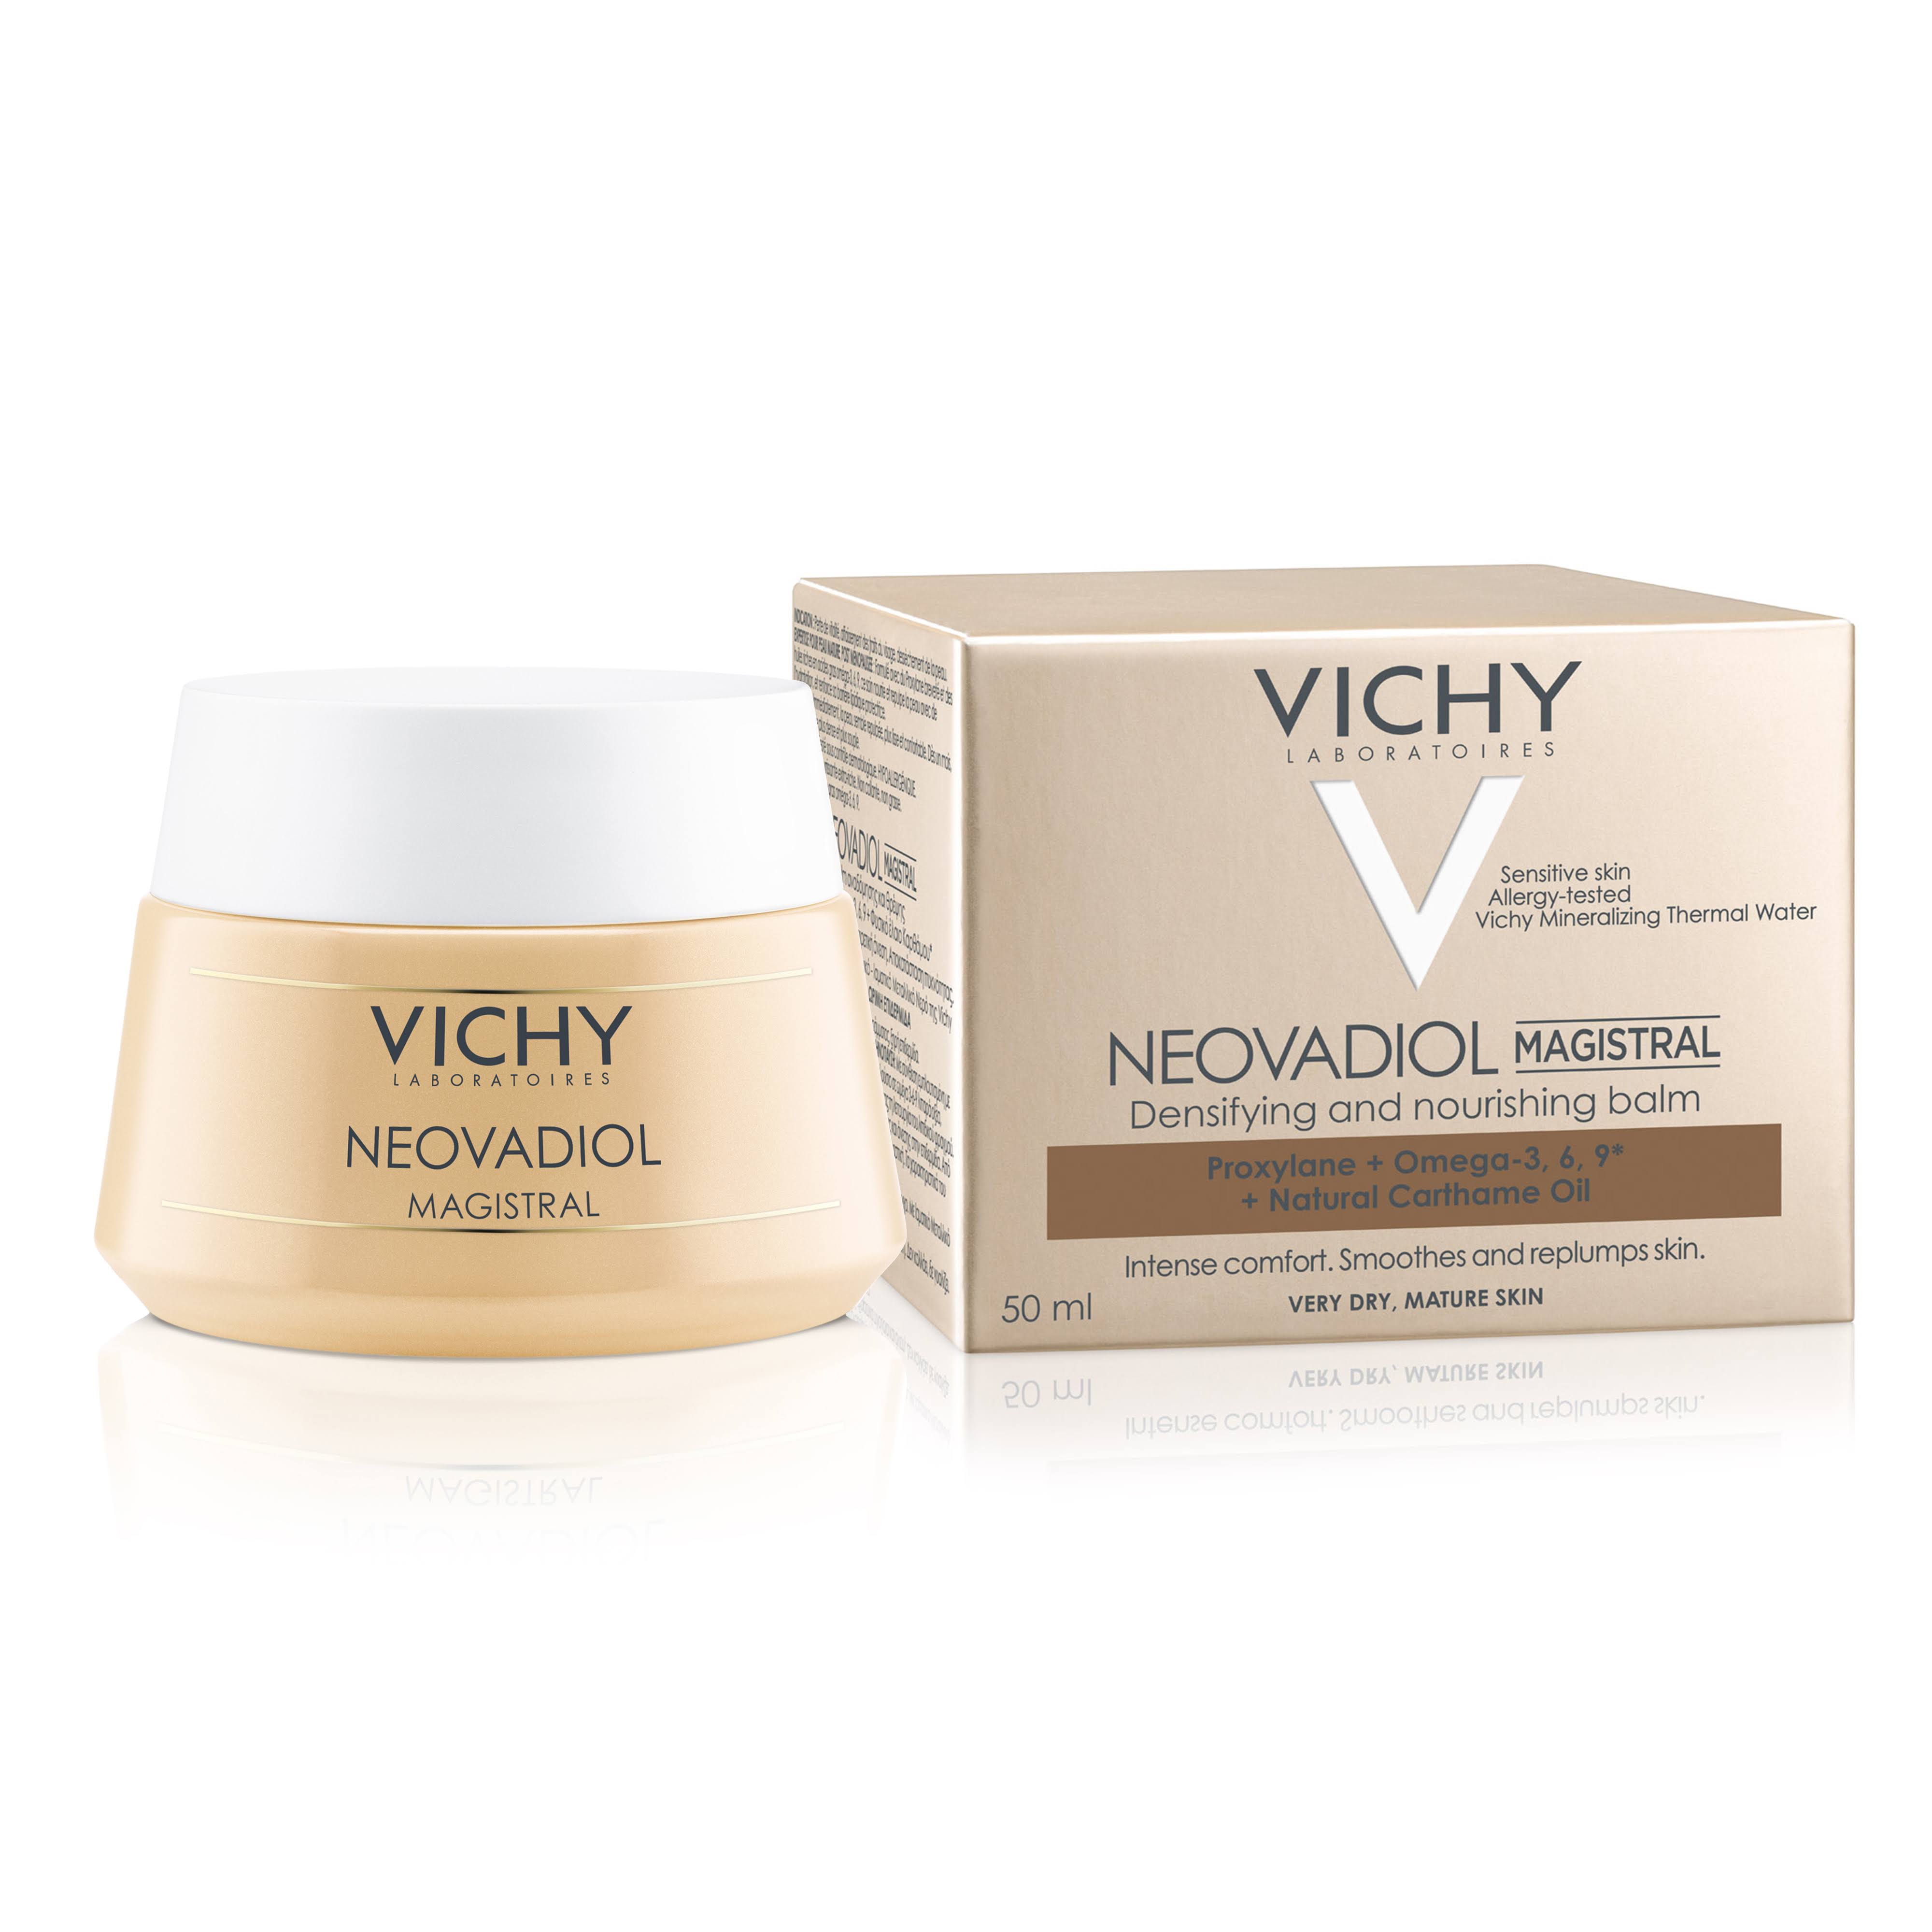 Vichy Neovadiol Magistral Day And Night Cream - 50ml